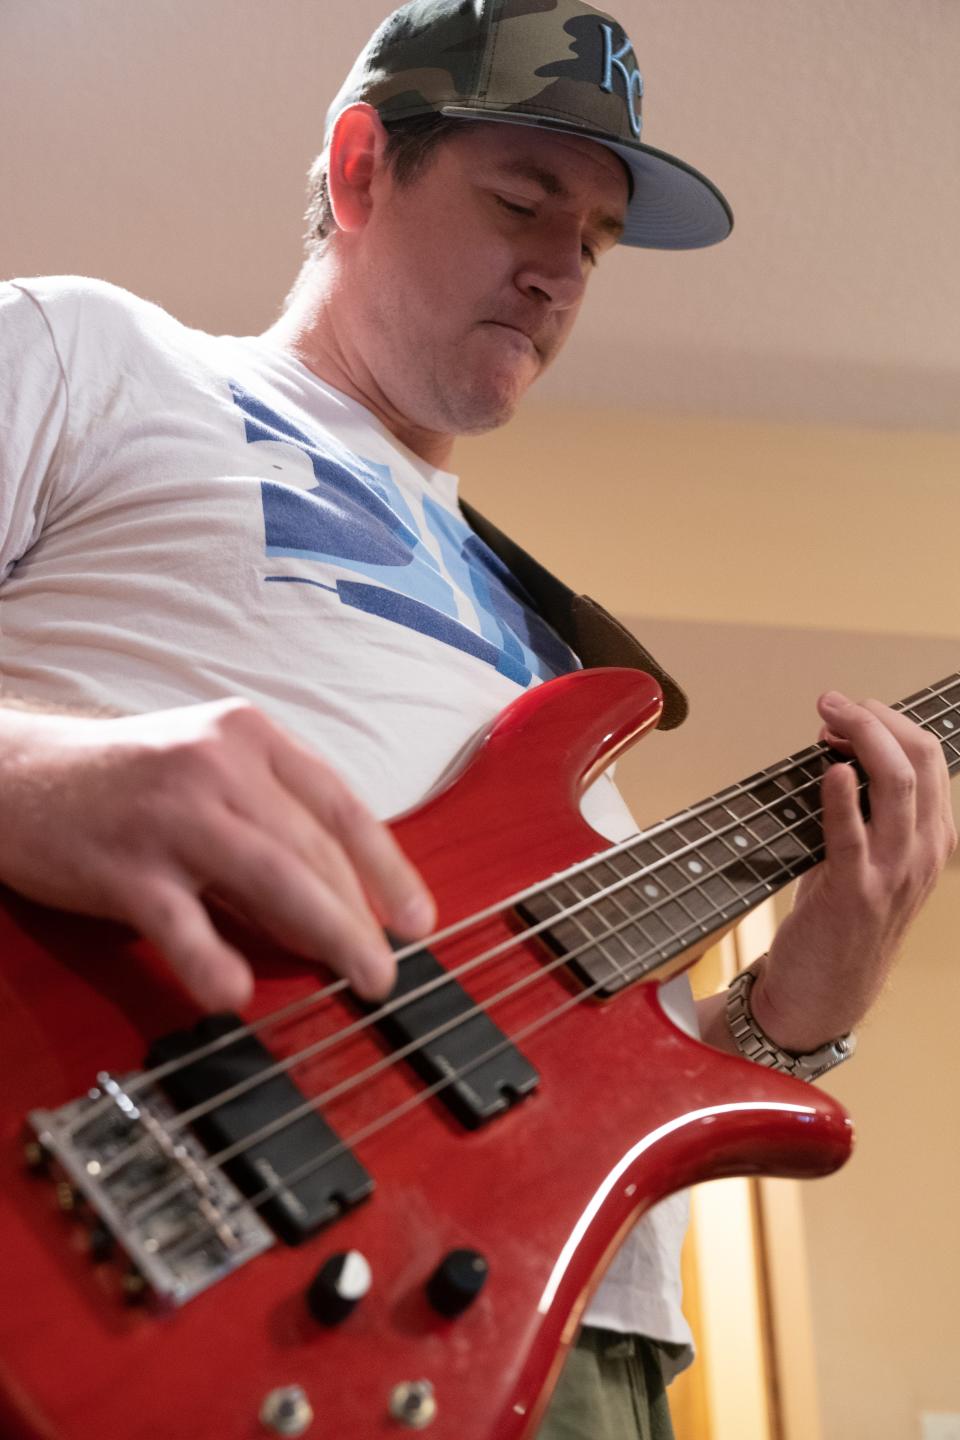 "I like the idea of kids understanding that music is a lifetime pursuit," said Untamed Mustangz bassist and Topeka West teacher Zach Dinges. "Kids do all kinds of things in high school, but the day comes when you can’t play football anymore. But you can play music until you’re 90 years old. It’s good for kids to see that. You don’t ever have to quit music."